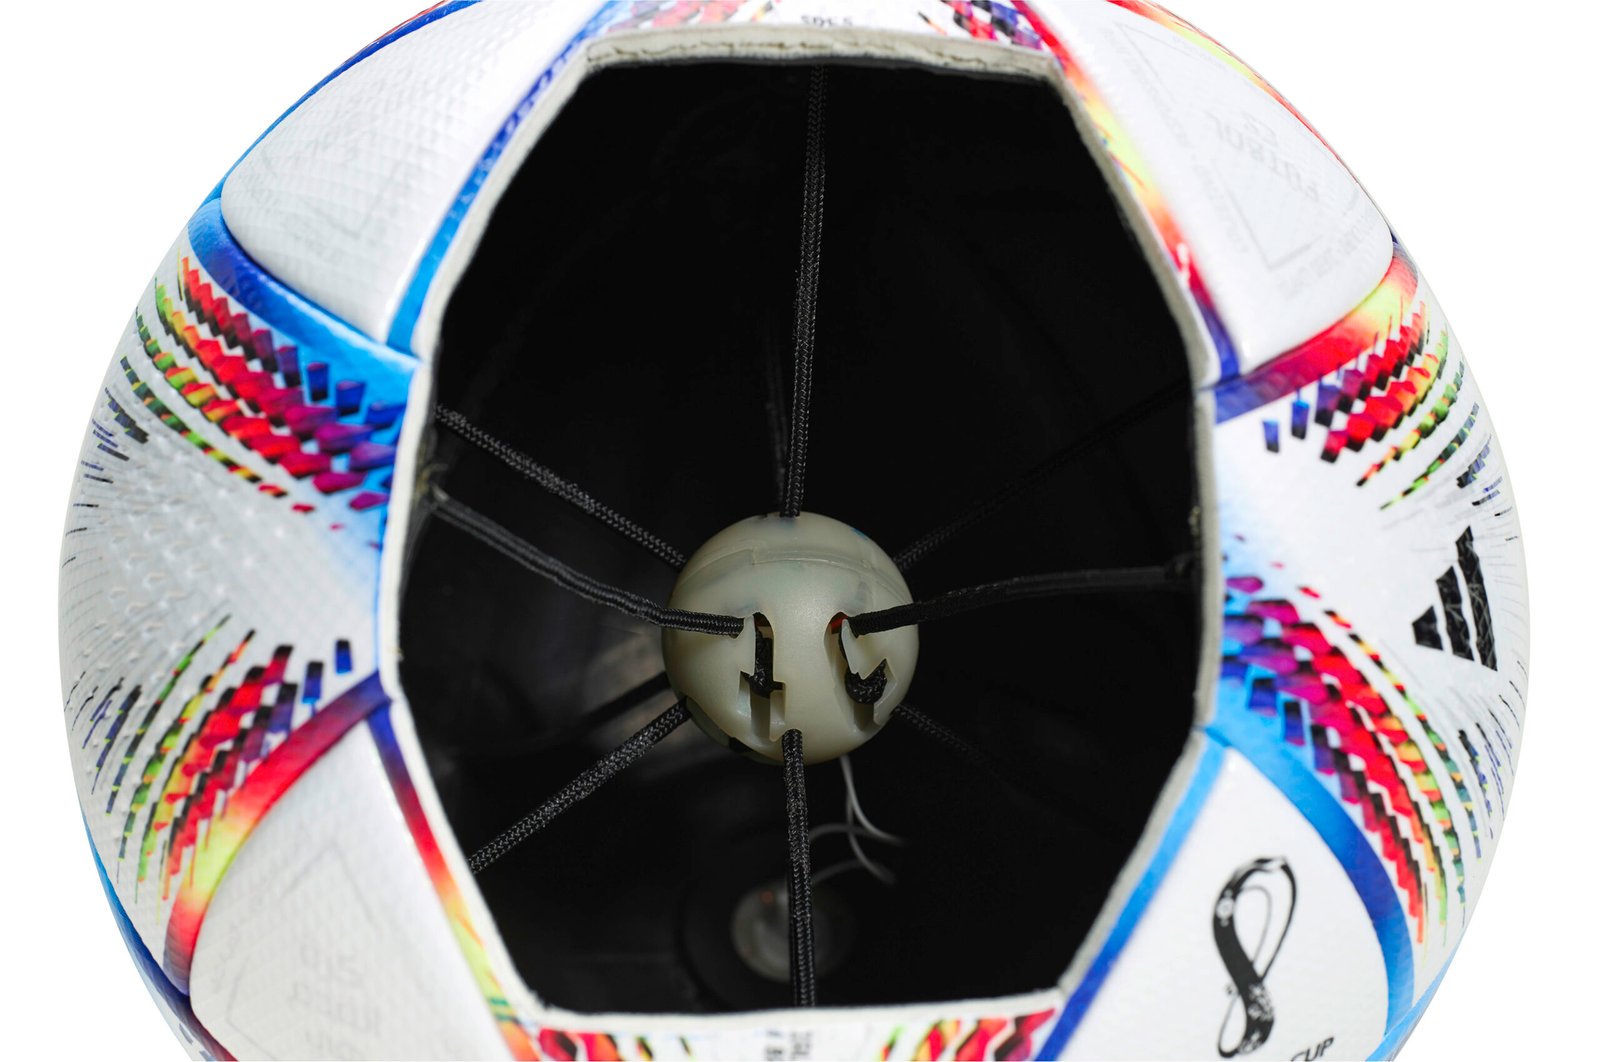 ADIDAS REVEALS THE FIRST FIFA WORLD CUPTM OFFICIAL MATCH BALL FEATURING CONNECTED BALL TECHNOLOGY 